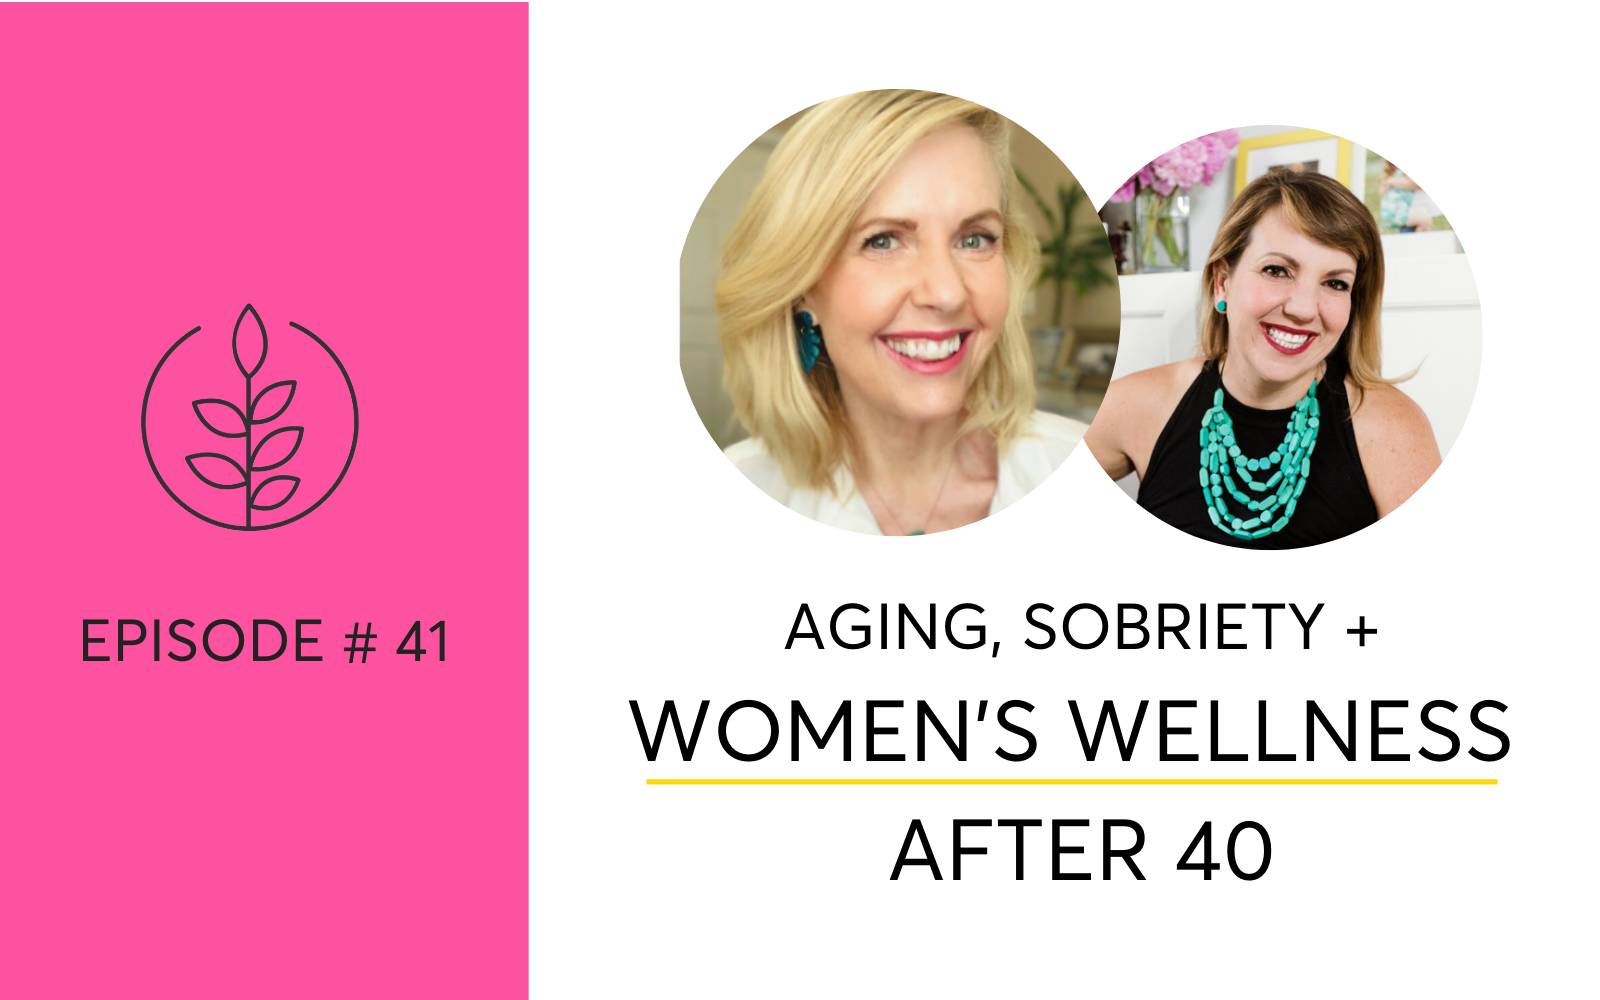 Aging, Sobriety and Women’s Wellness After 40